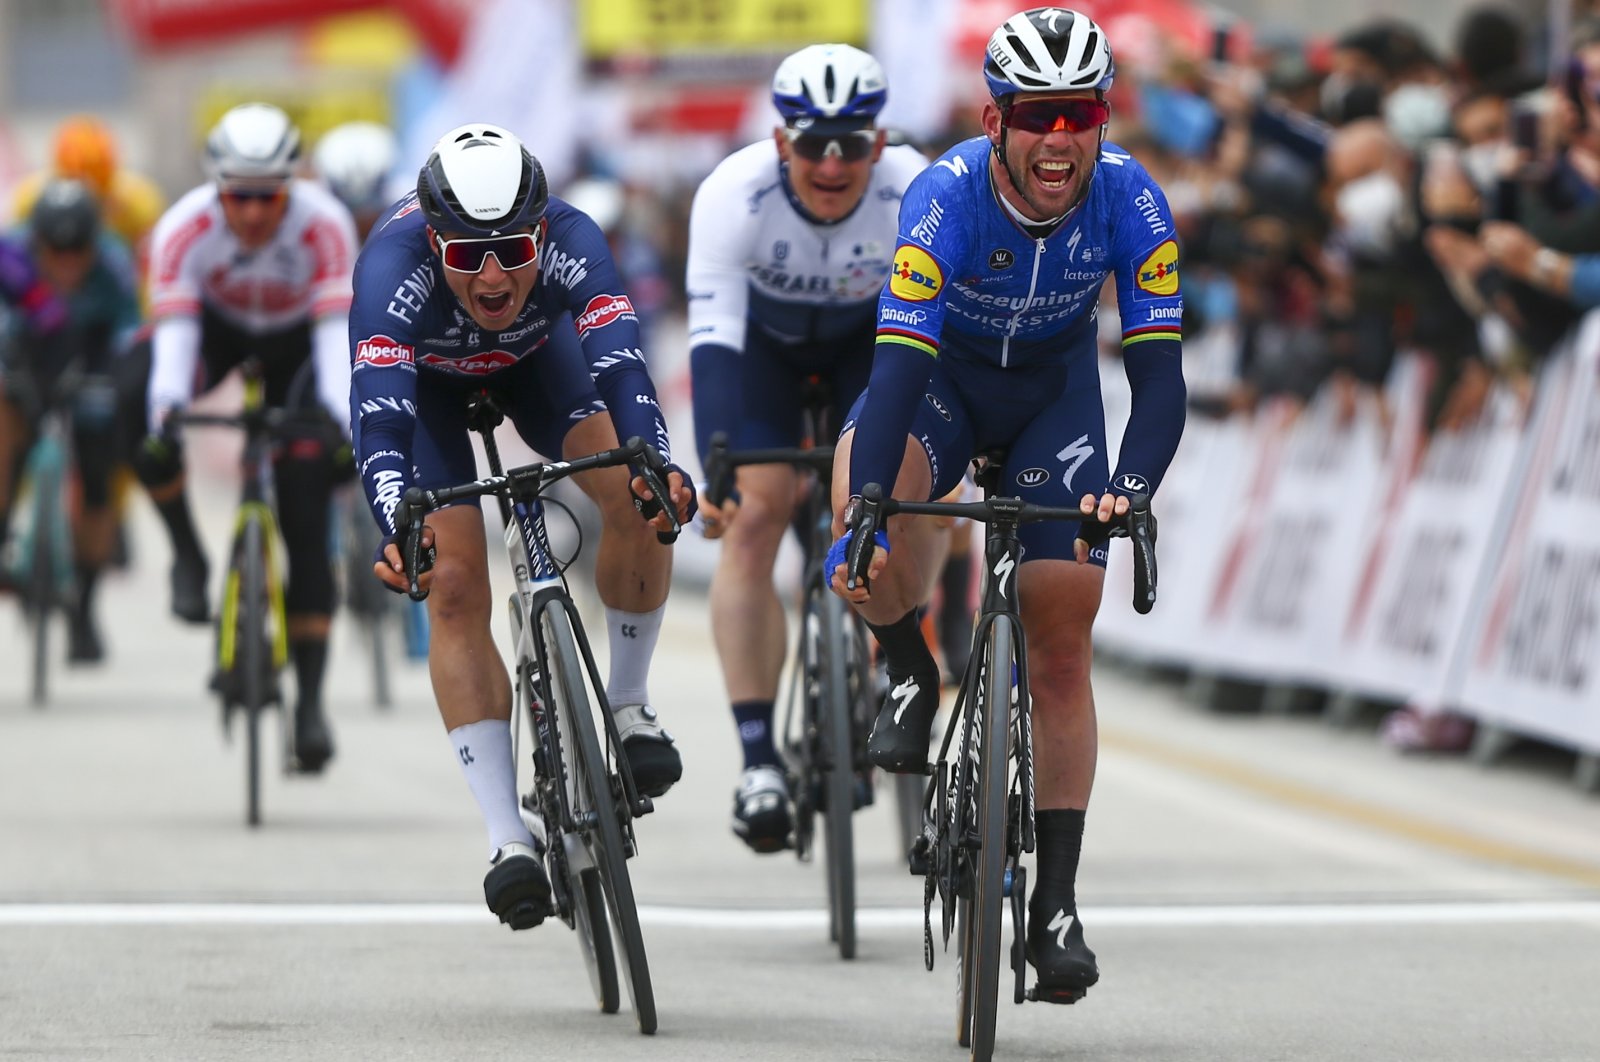 Britain's Cavendish ends dry patch with Tour of Turkey stage win ...